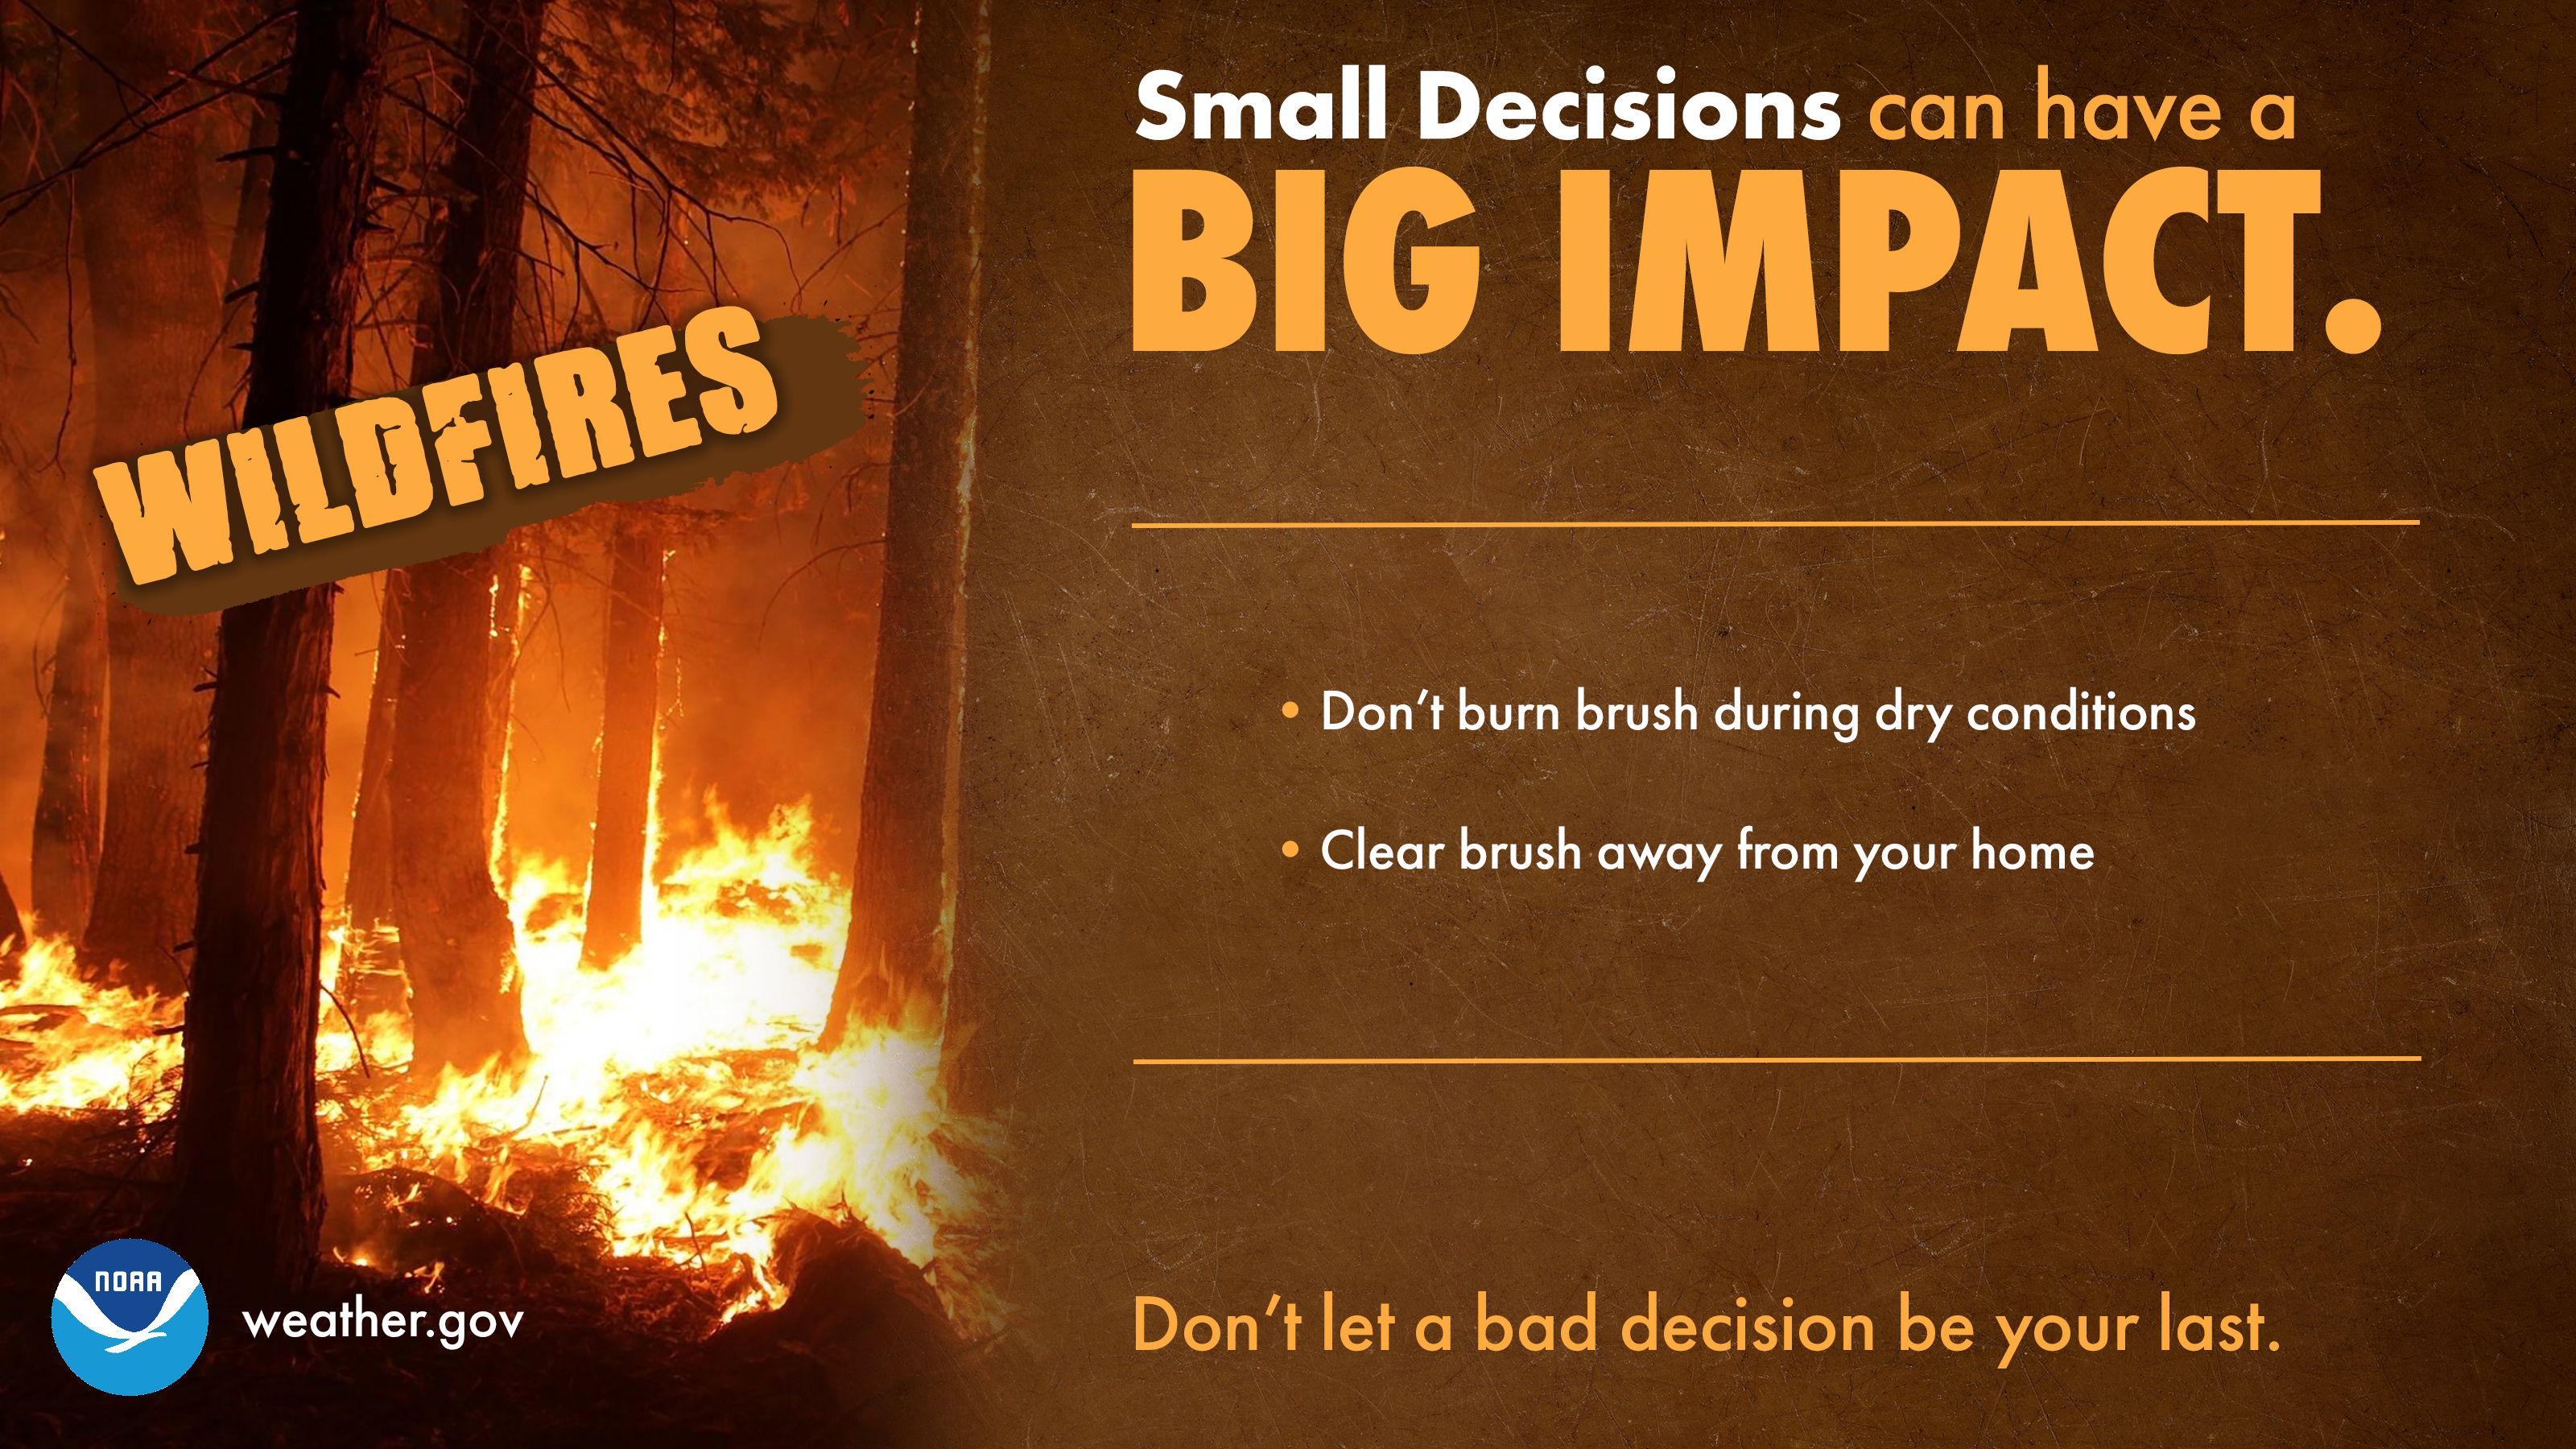 Small Decisions can have a big impact: Wildfires. 1) Don't burn brush during dry conditions. 2) Clear brush away from your home. Don't let a bad decision be your last.